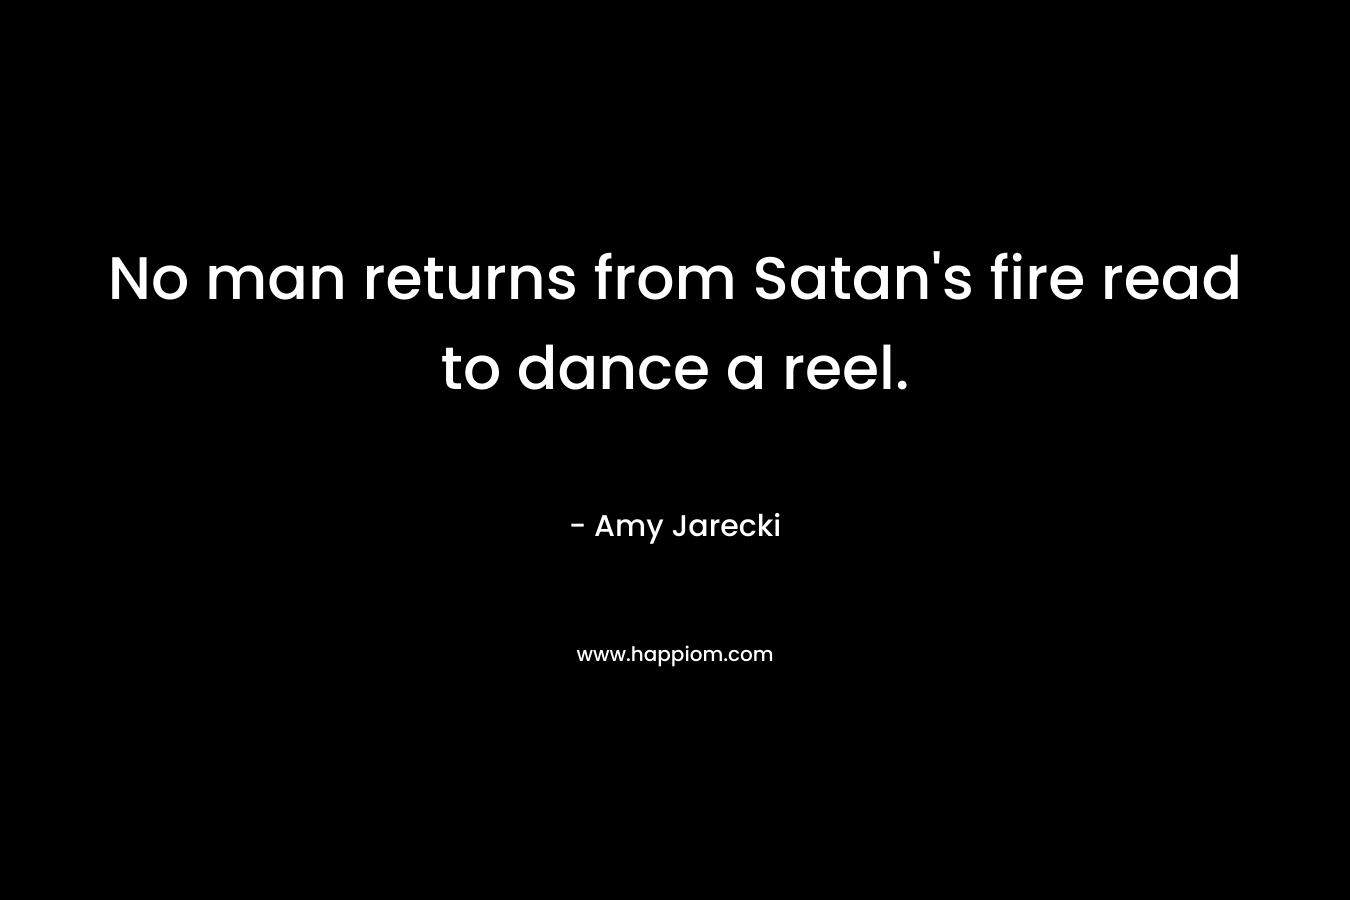 No man returns from Satan's fire read to dance a reel.